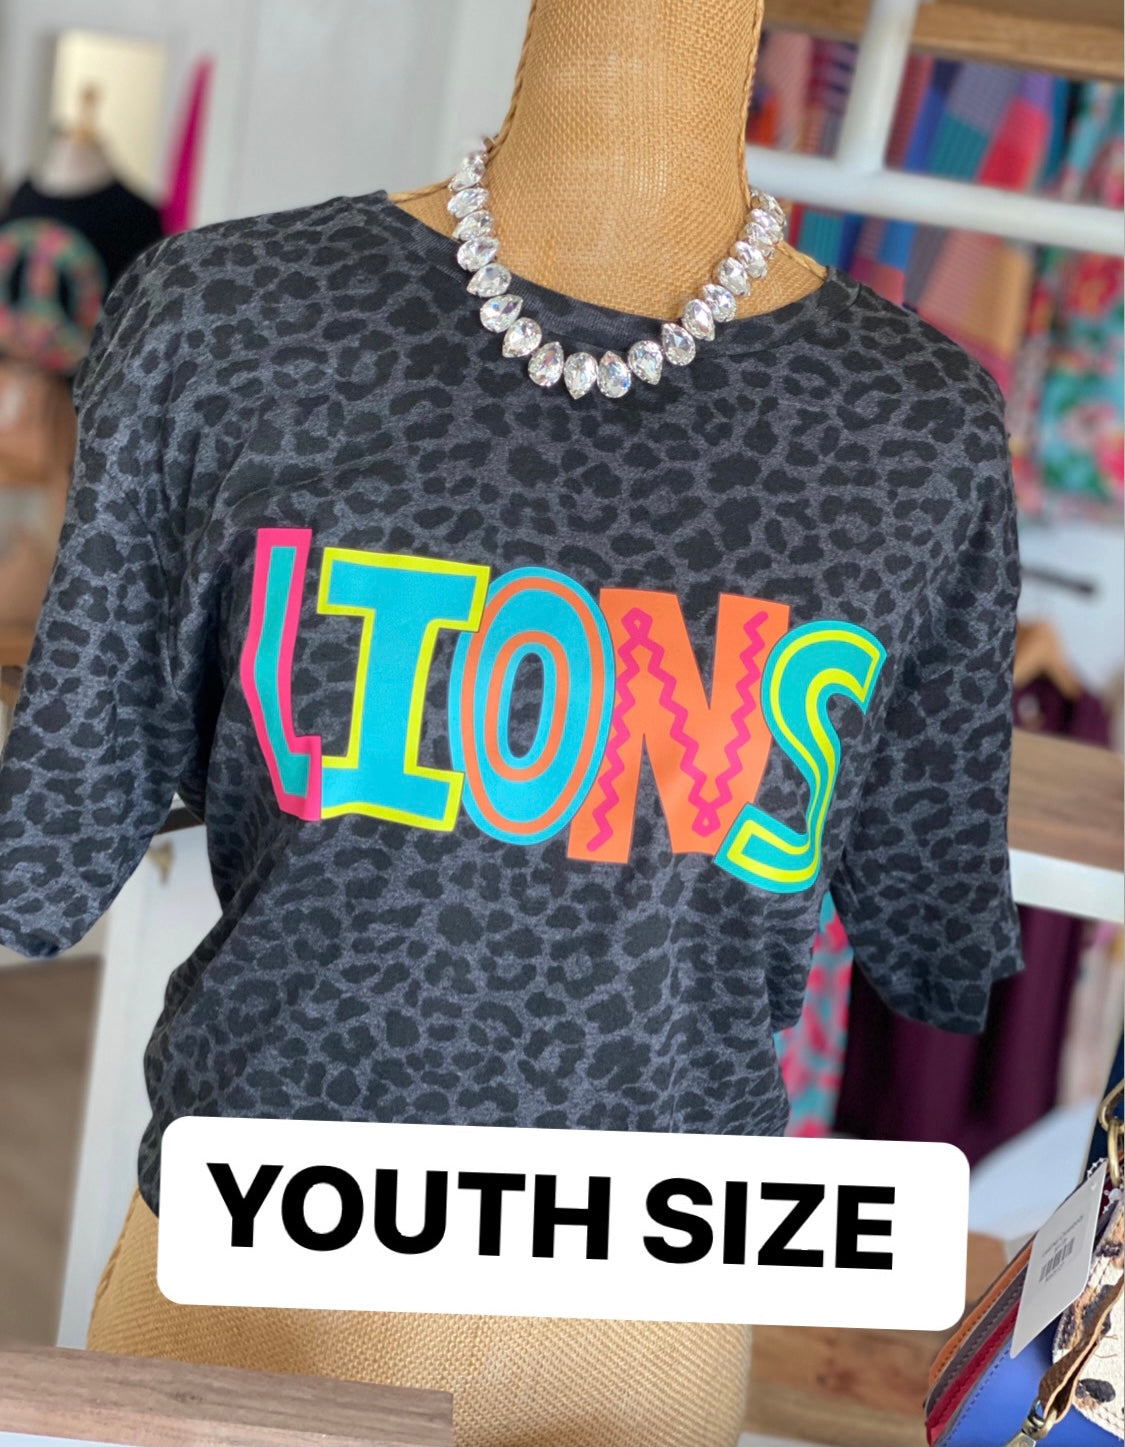 Lions Pride - Youth